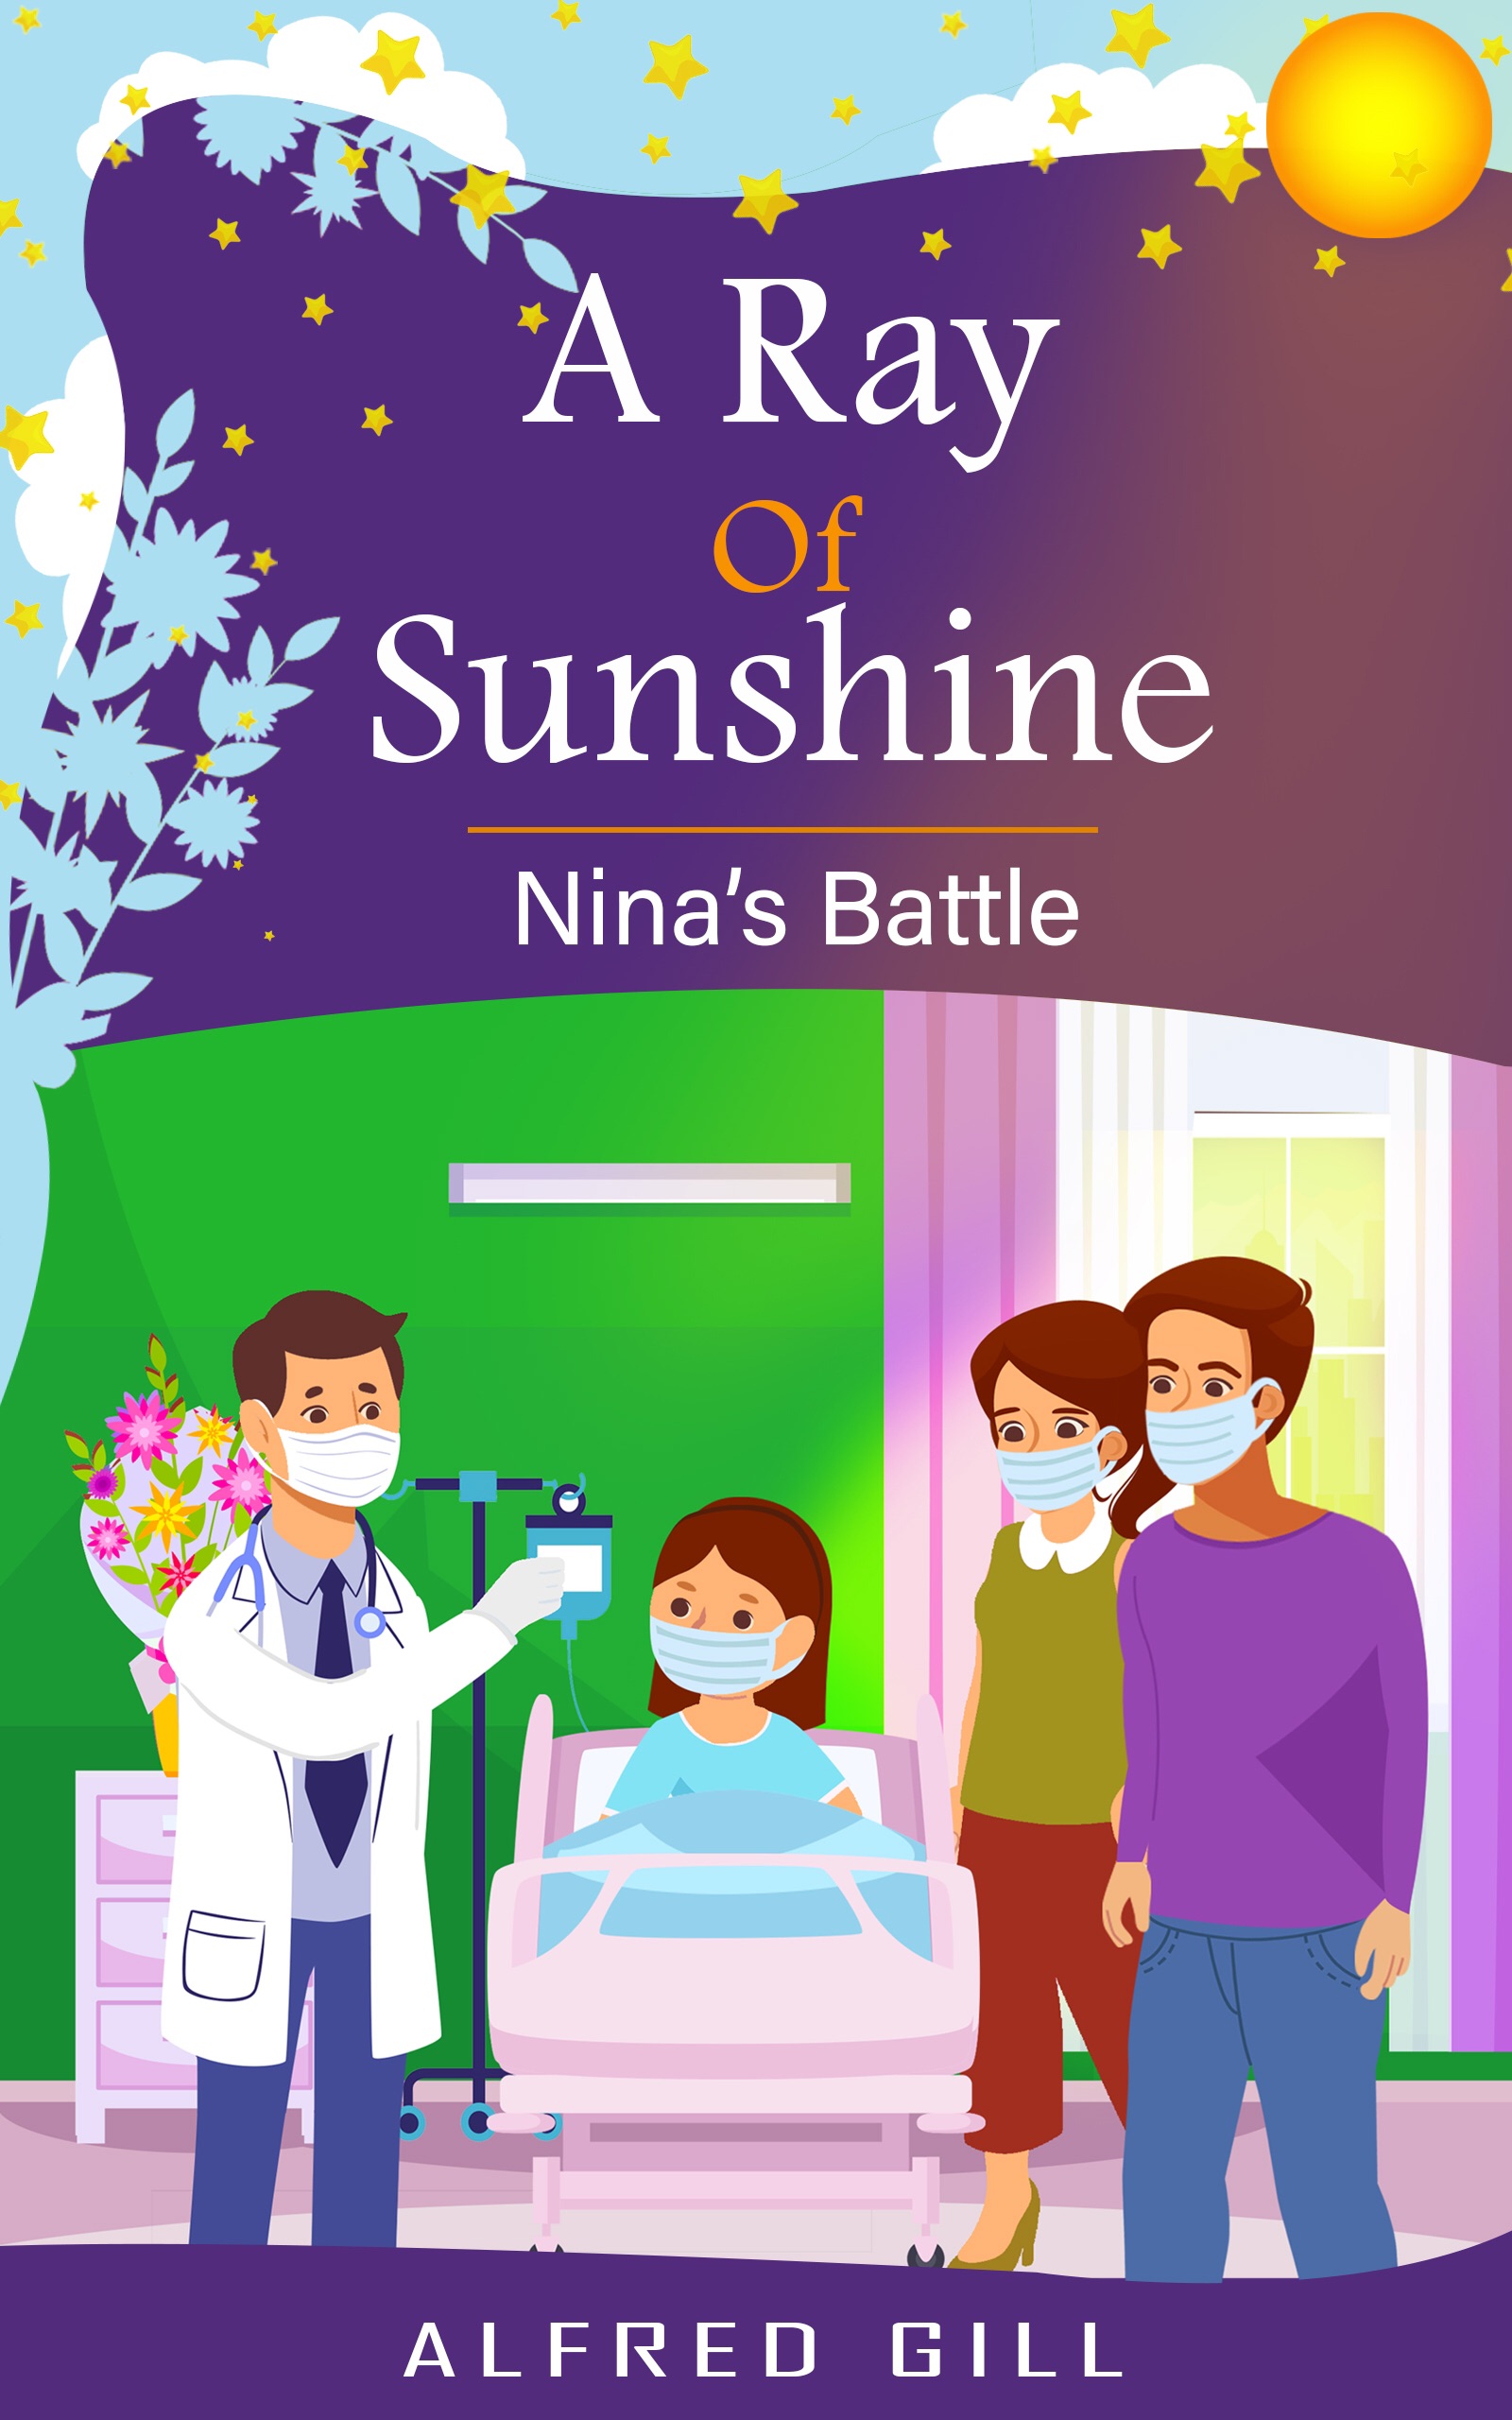 FREE: A Ray of Sunshine: Nina’s Battle by Alfred Gill